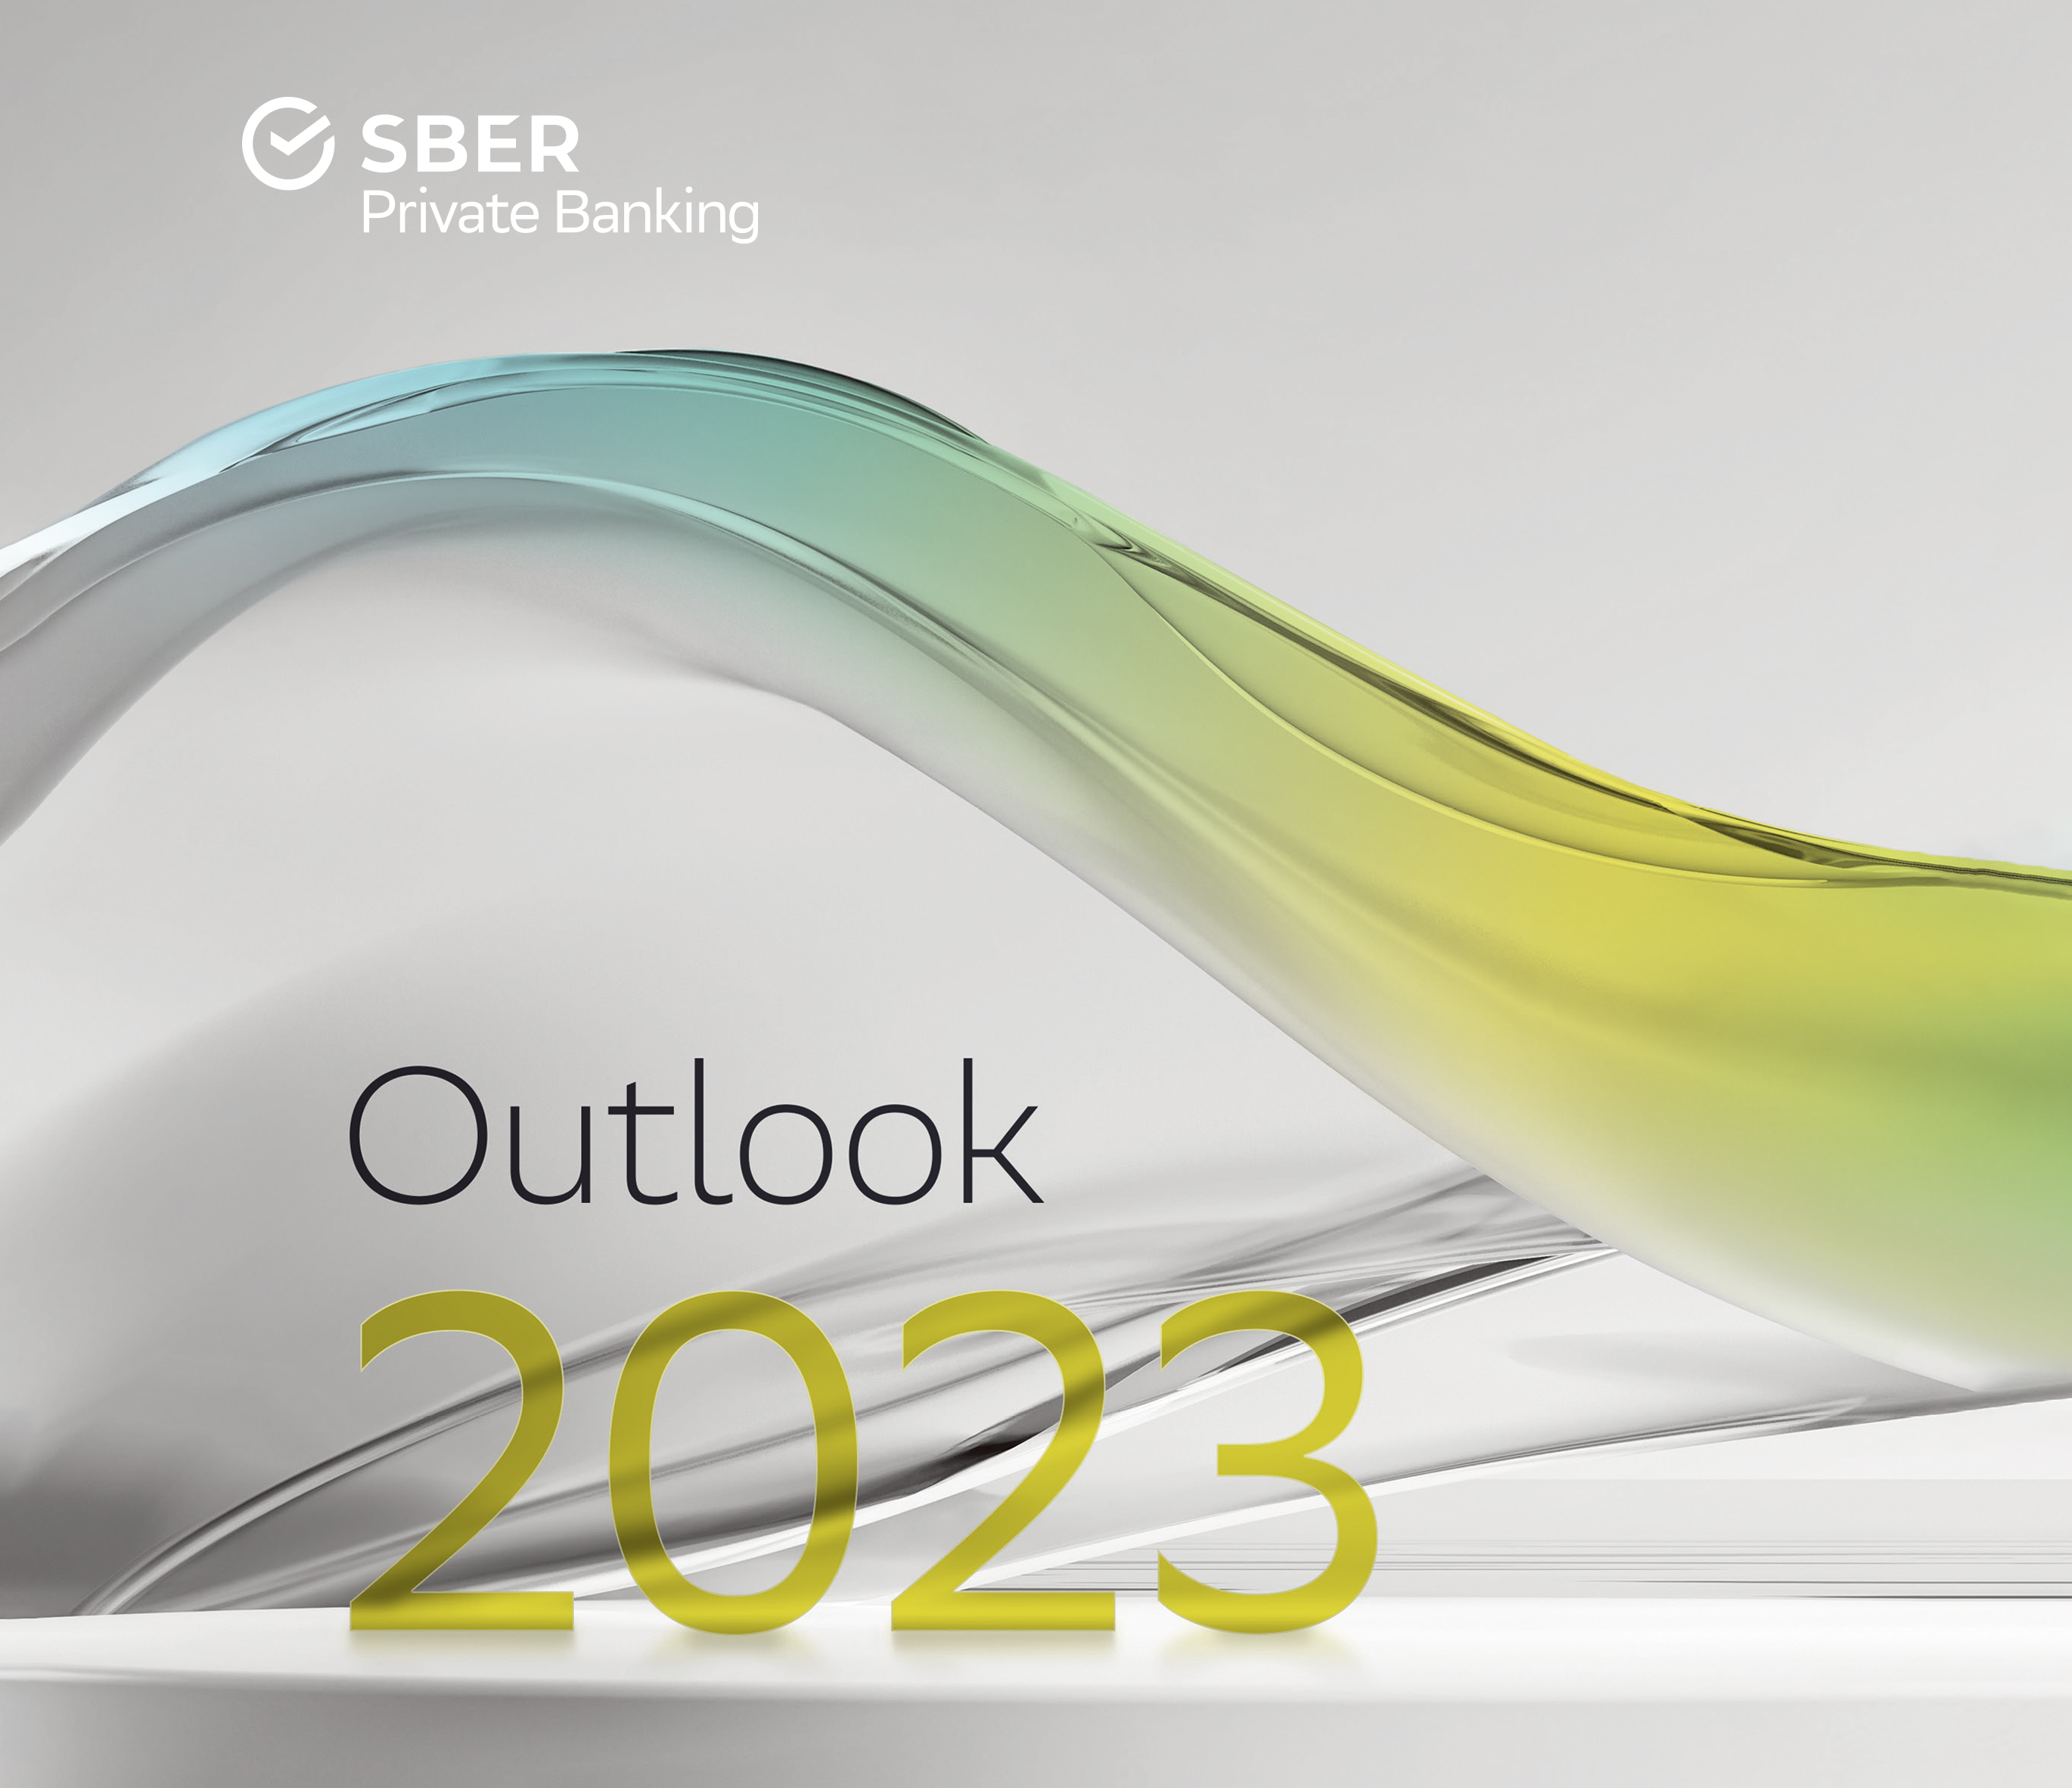 Sber Private Banking Outlook 2023